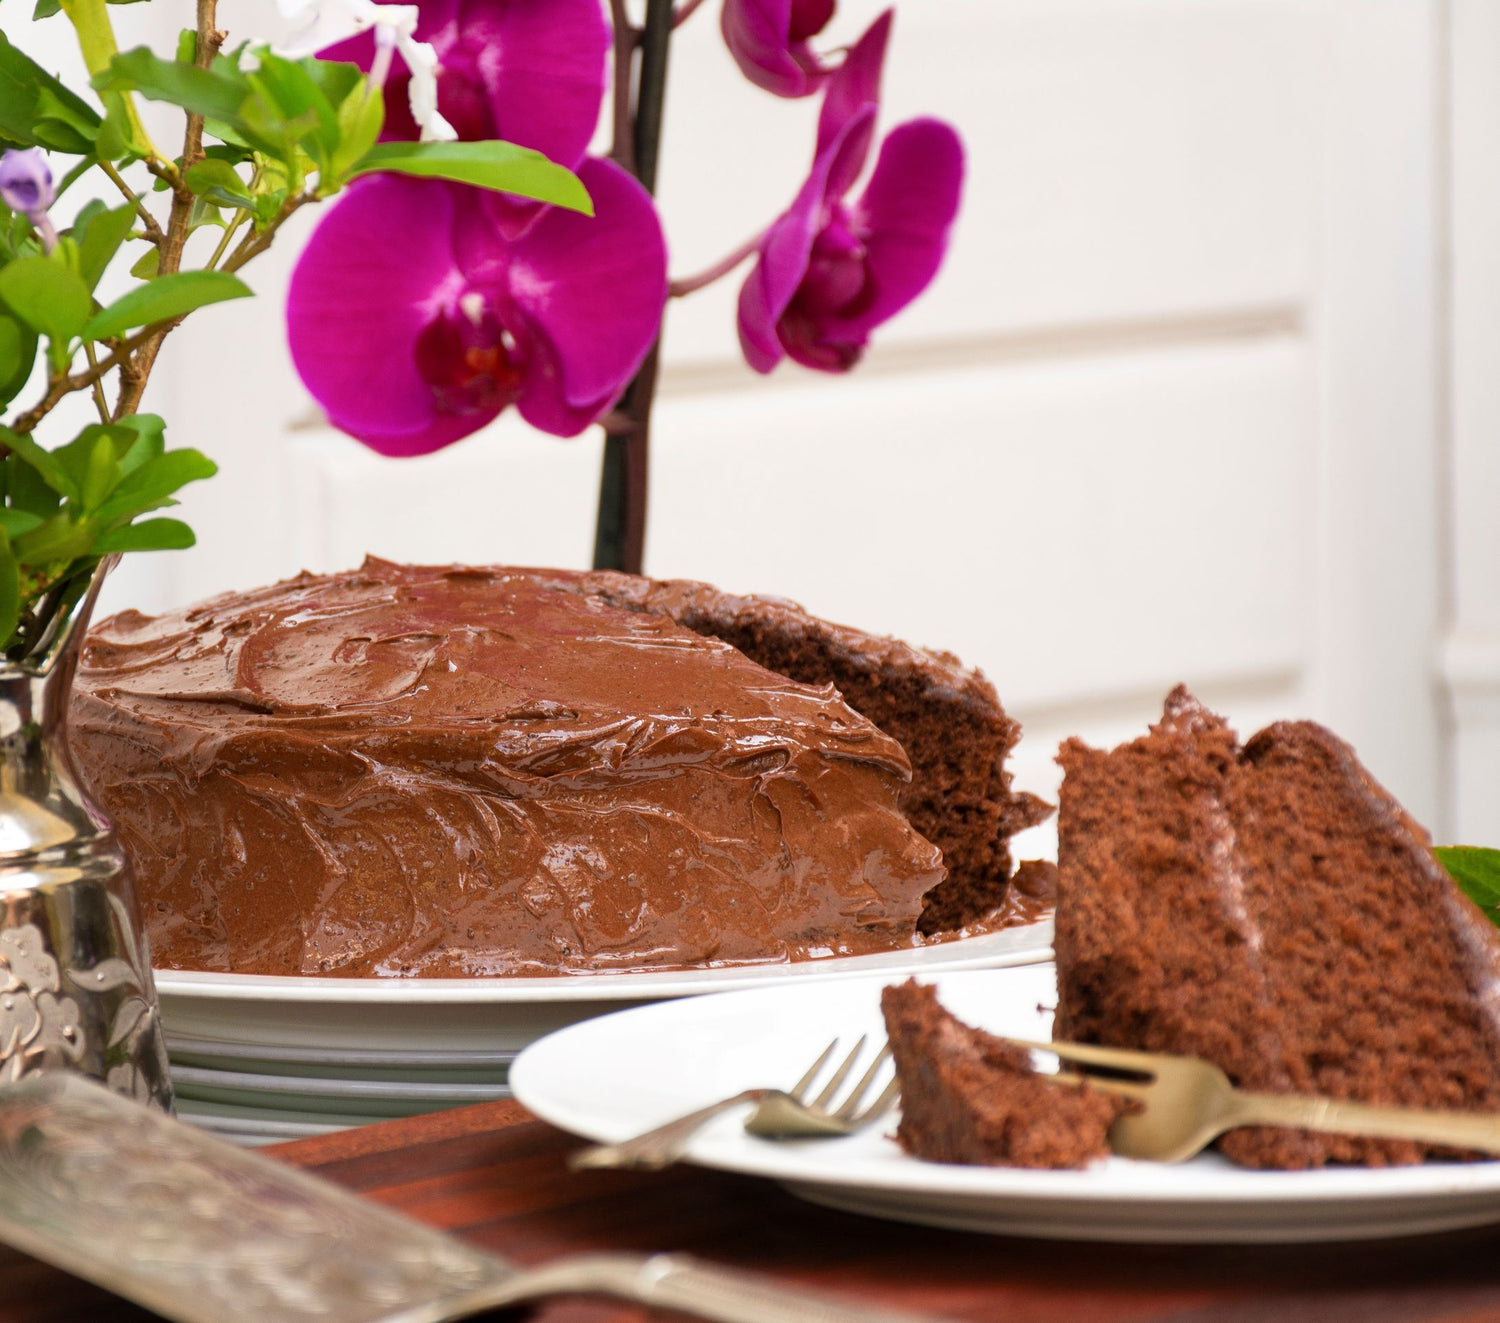 Coleman Royal Bakeries: Belgian Chocolate Cake. Makes two layers. Gluten-free (certified).